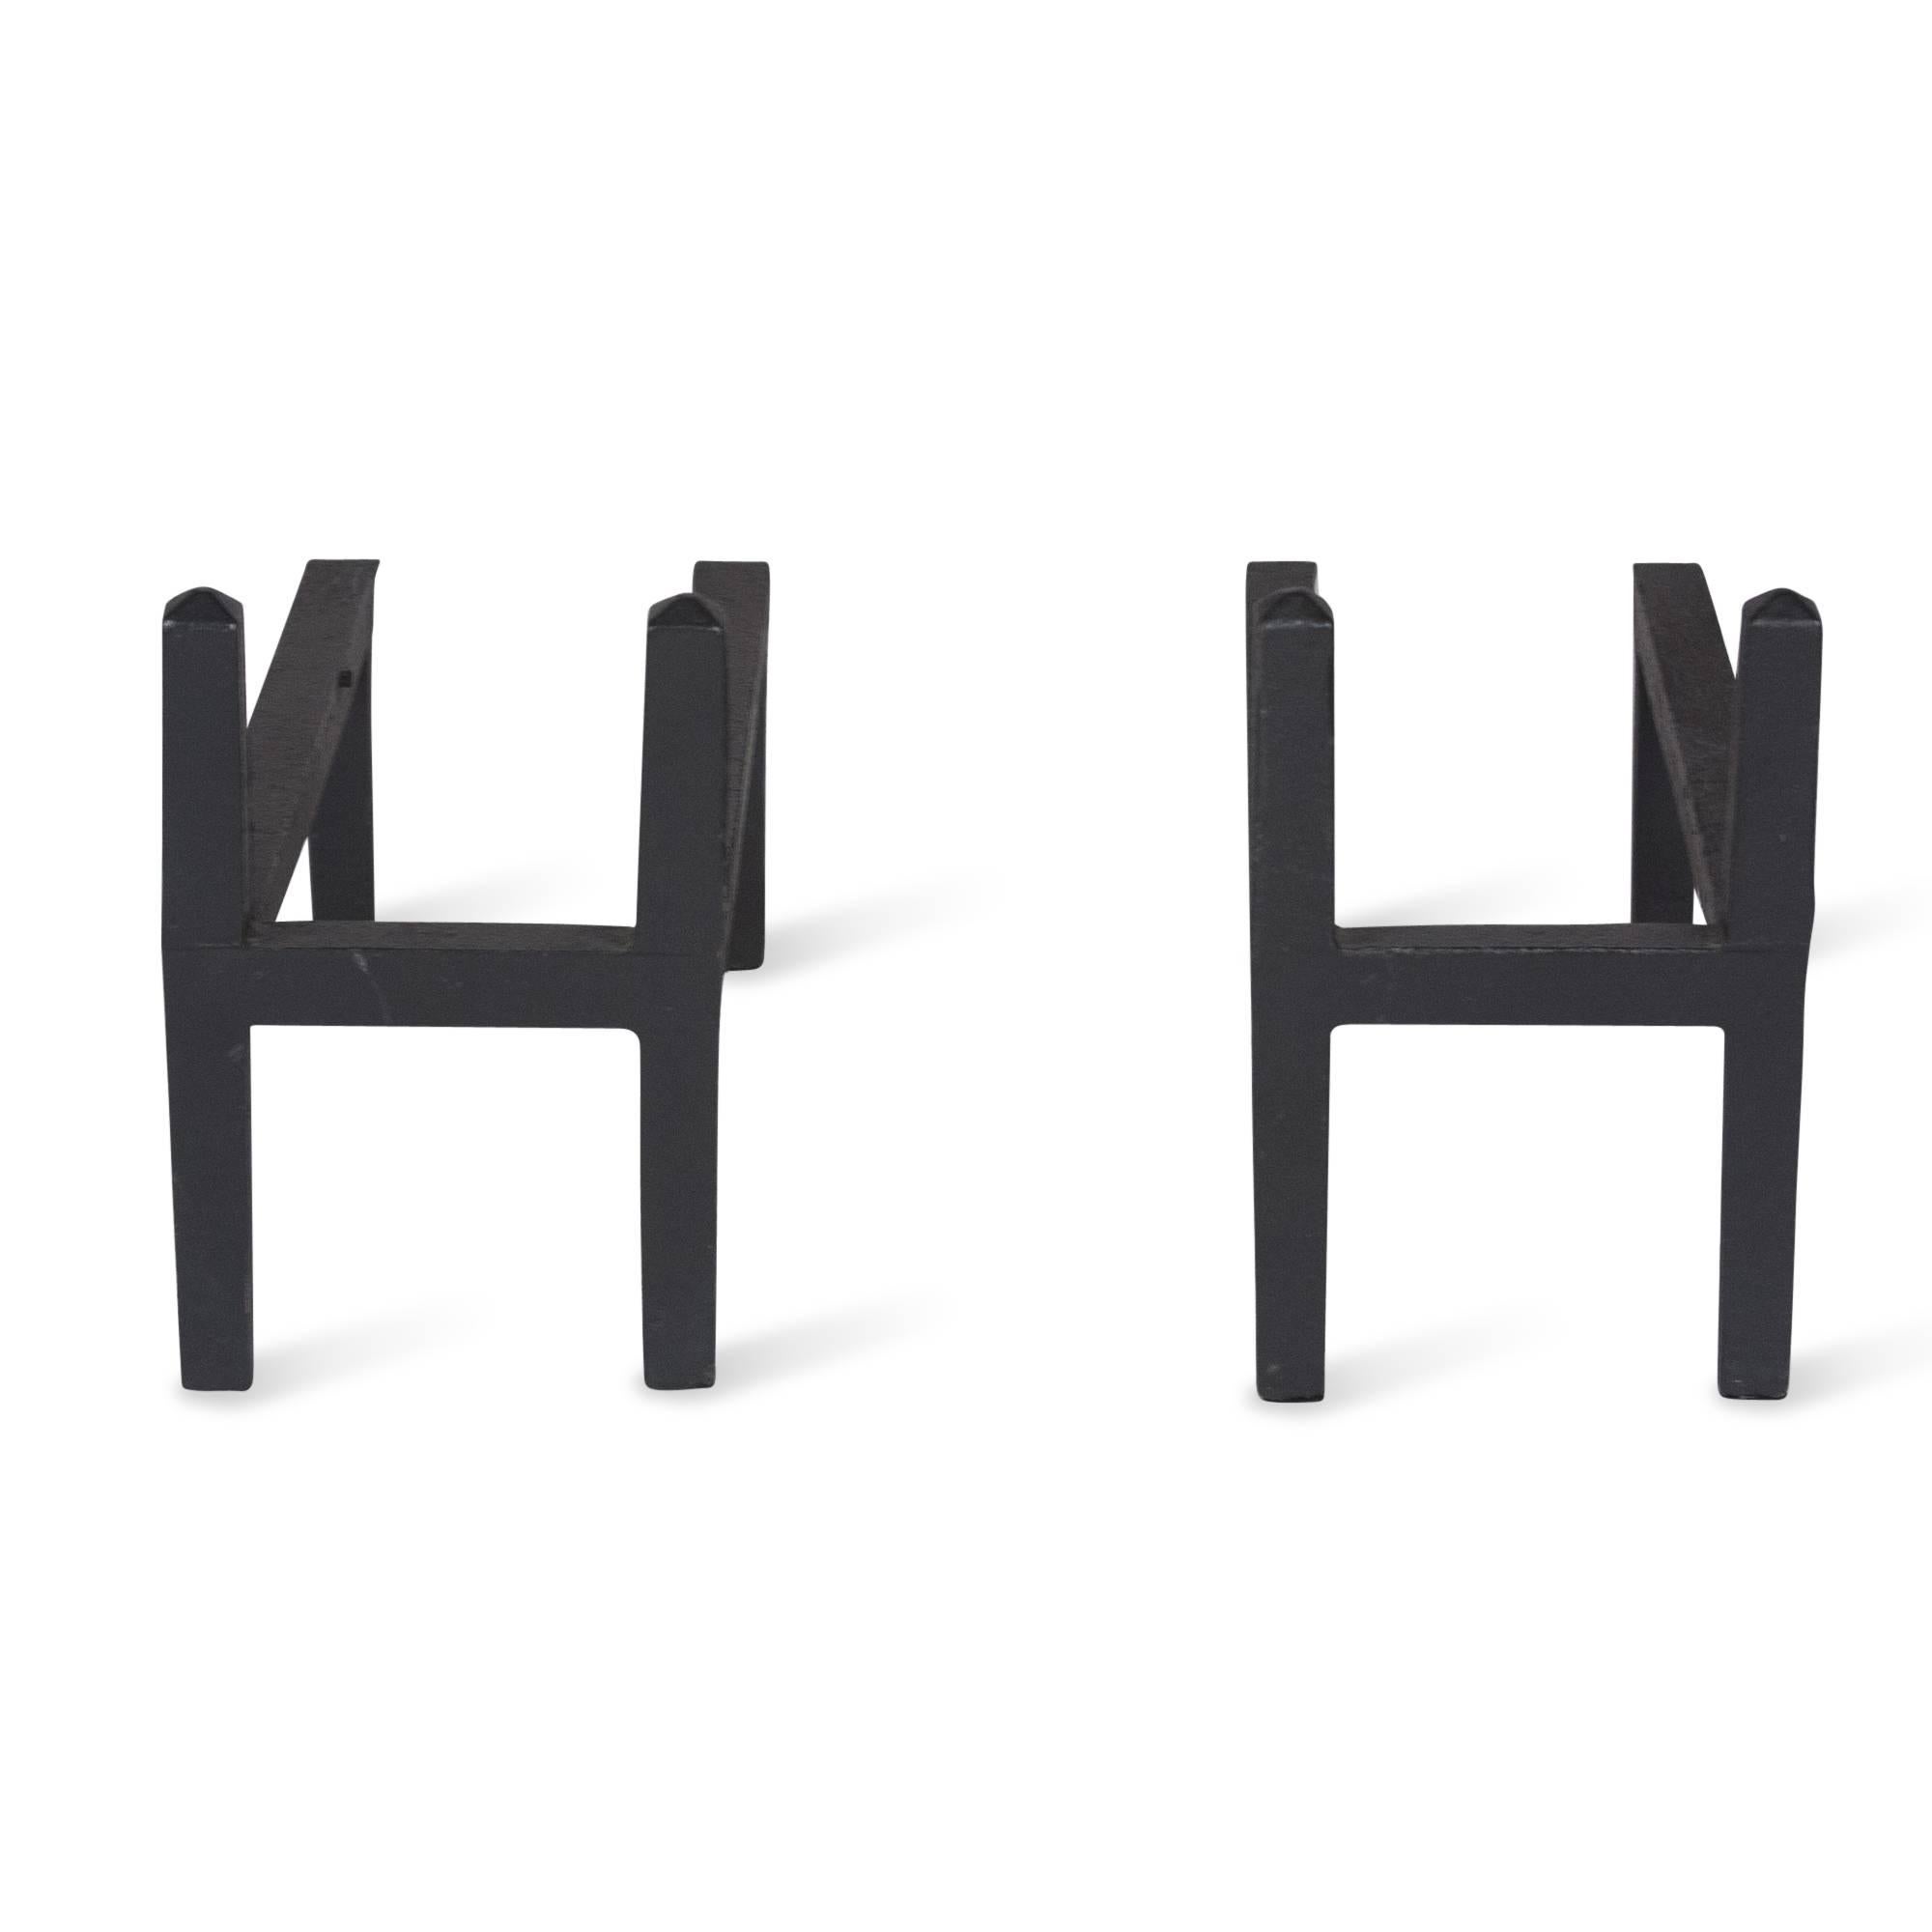 Pair of simple H-form iron andirons, with double backs, American, 1960s. Measures: 6 5/8 in. H, 4 1/2 in. W, 12 in. D.